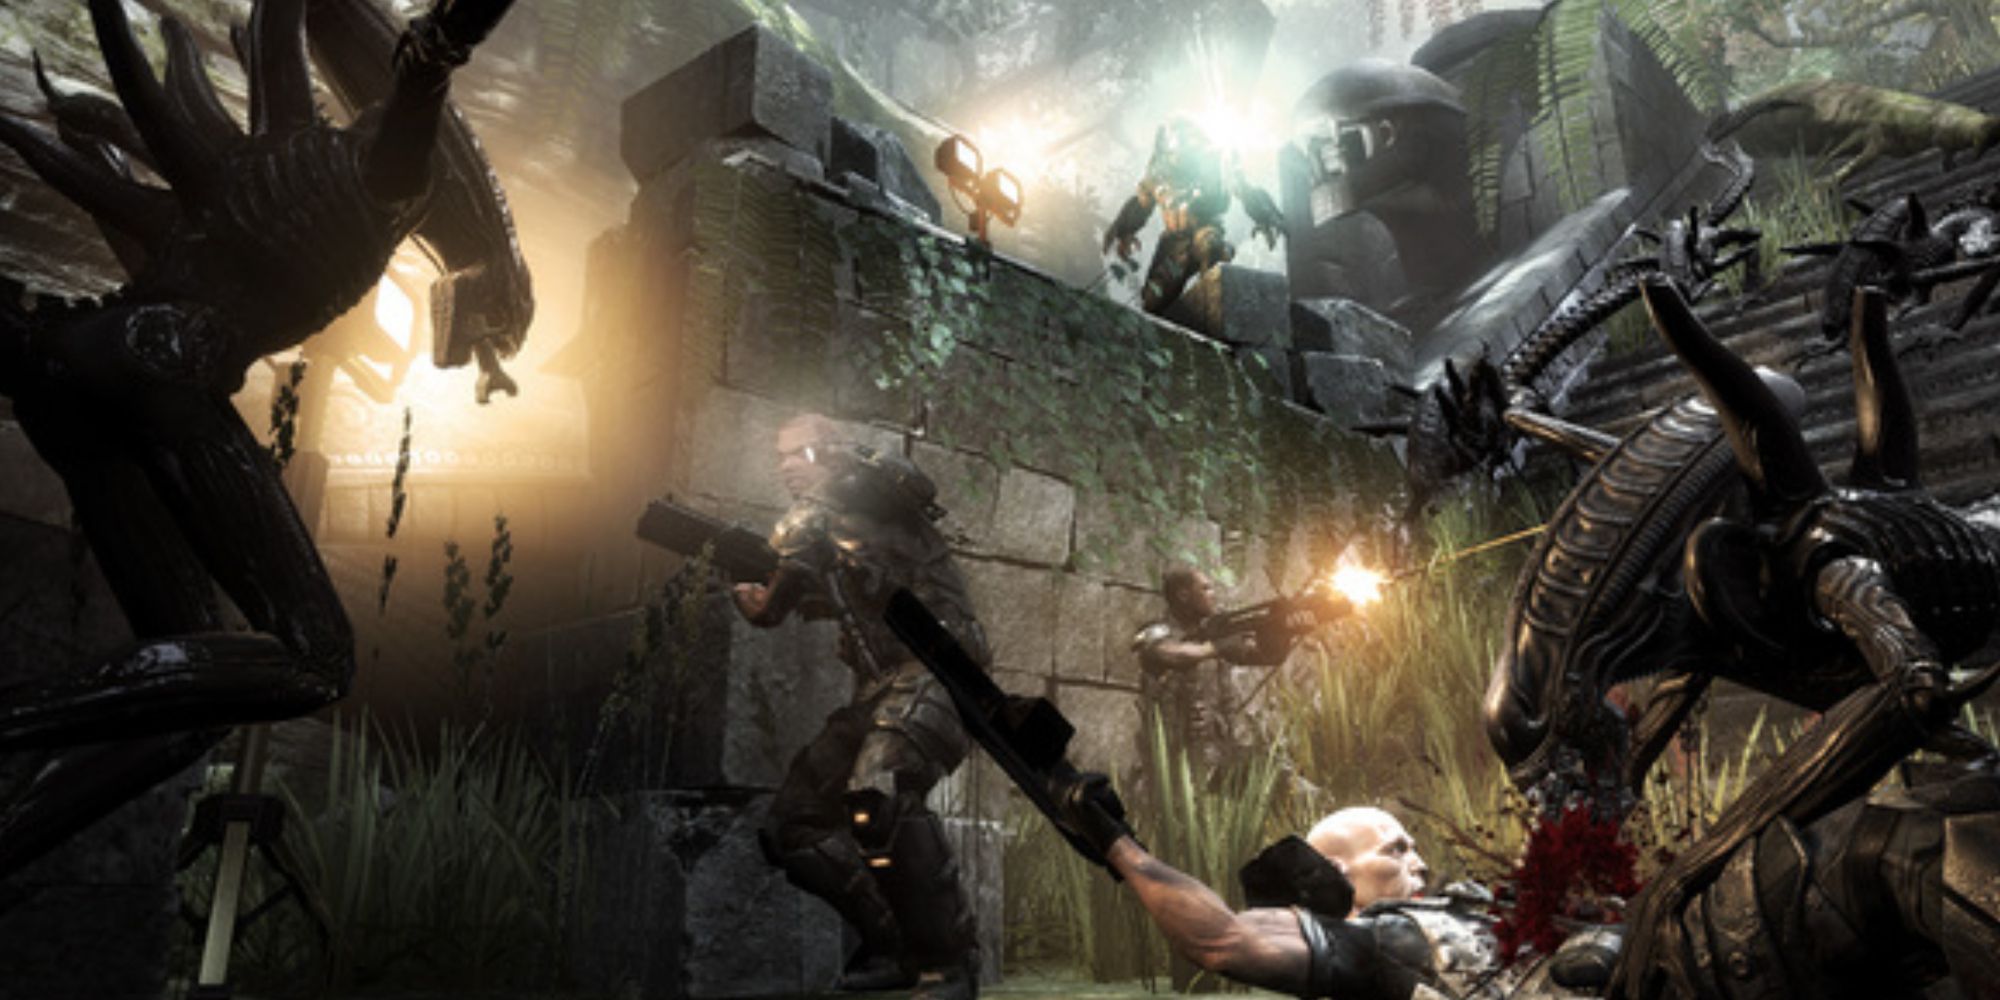 An image of gameplay from Alien Vs Predator Game